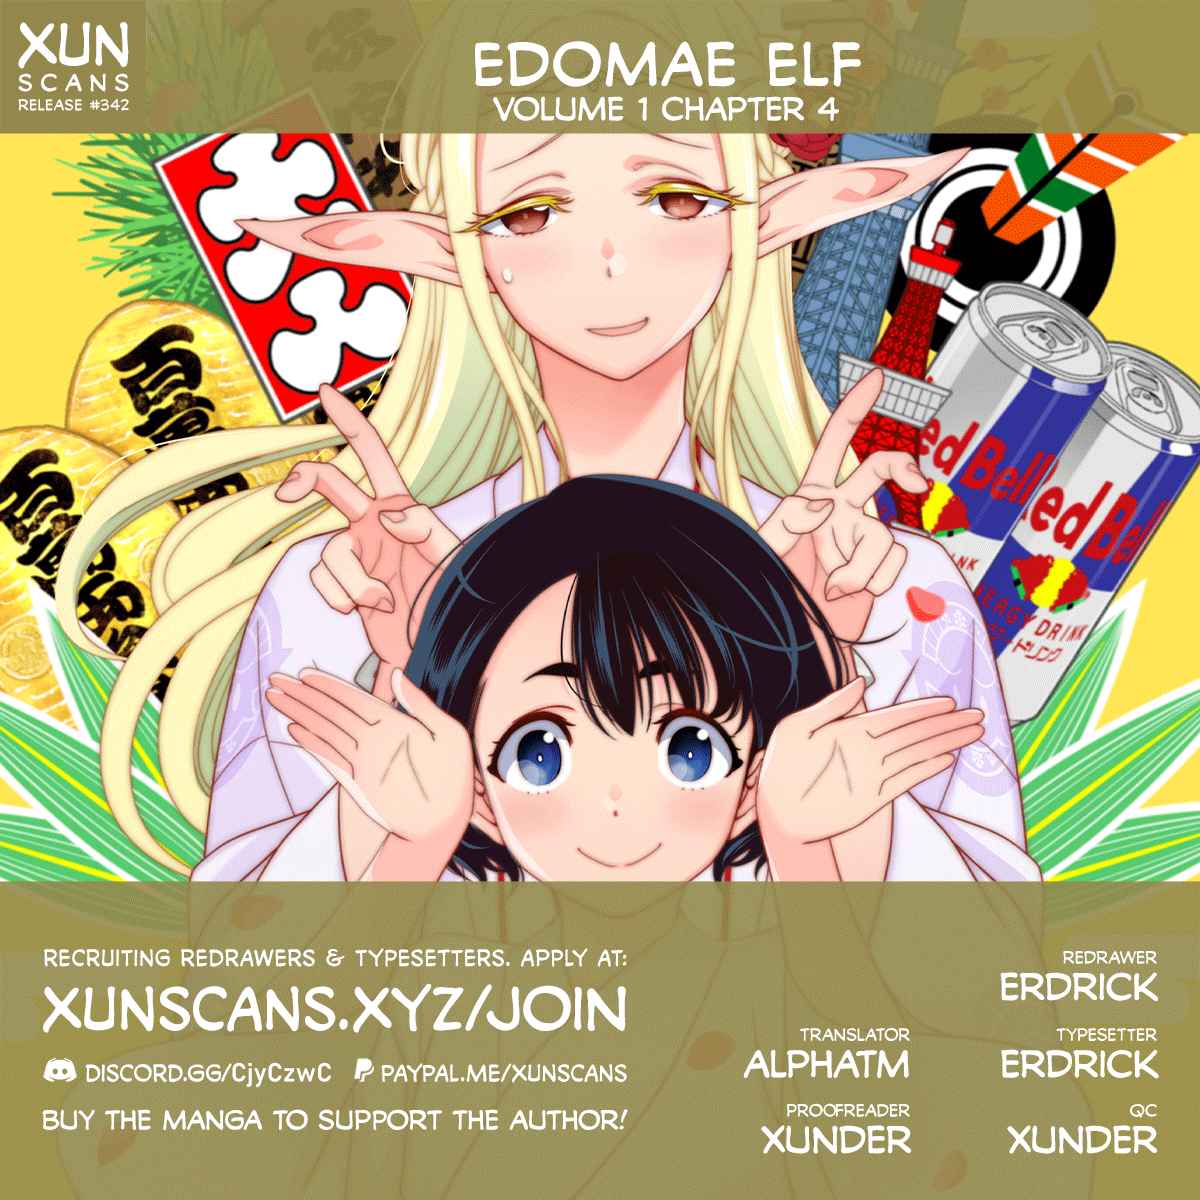 Edomae Elf Vol. 1 Ch. 4 The Edomae Elf and the Unknown Child